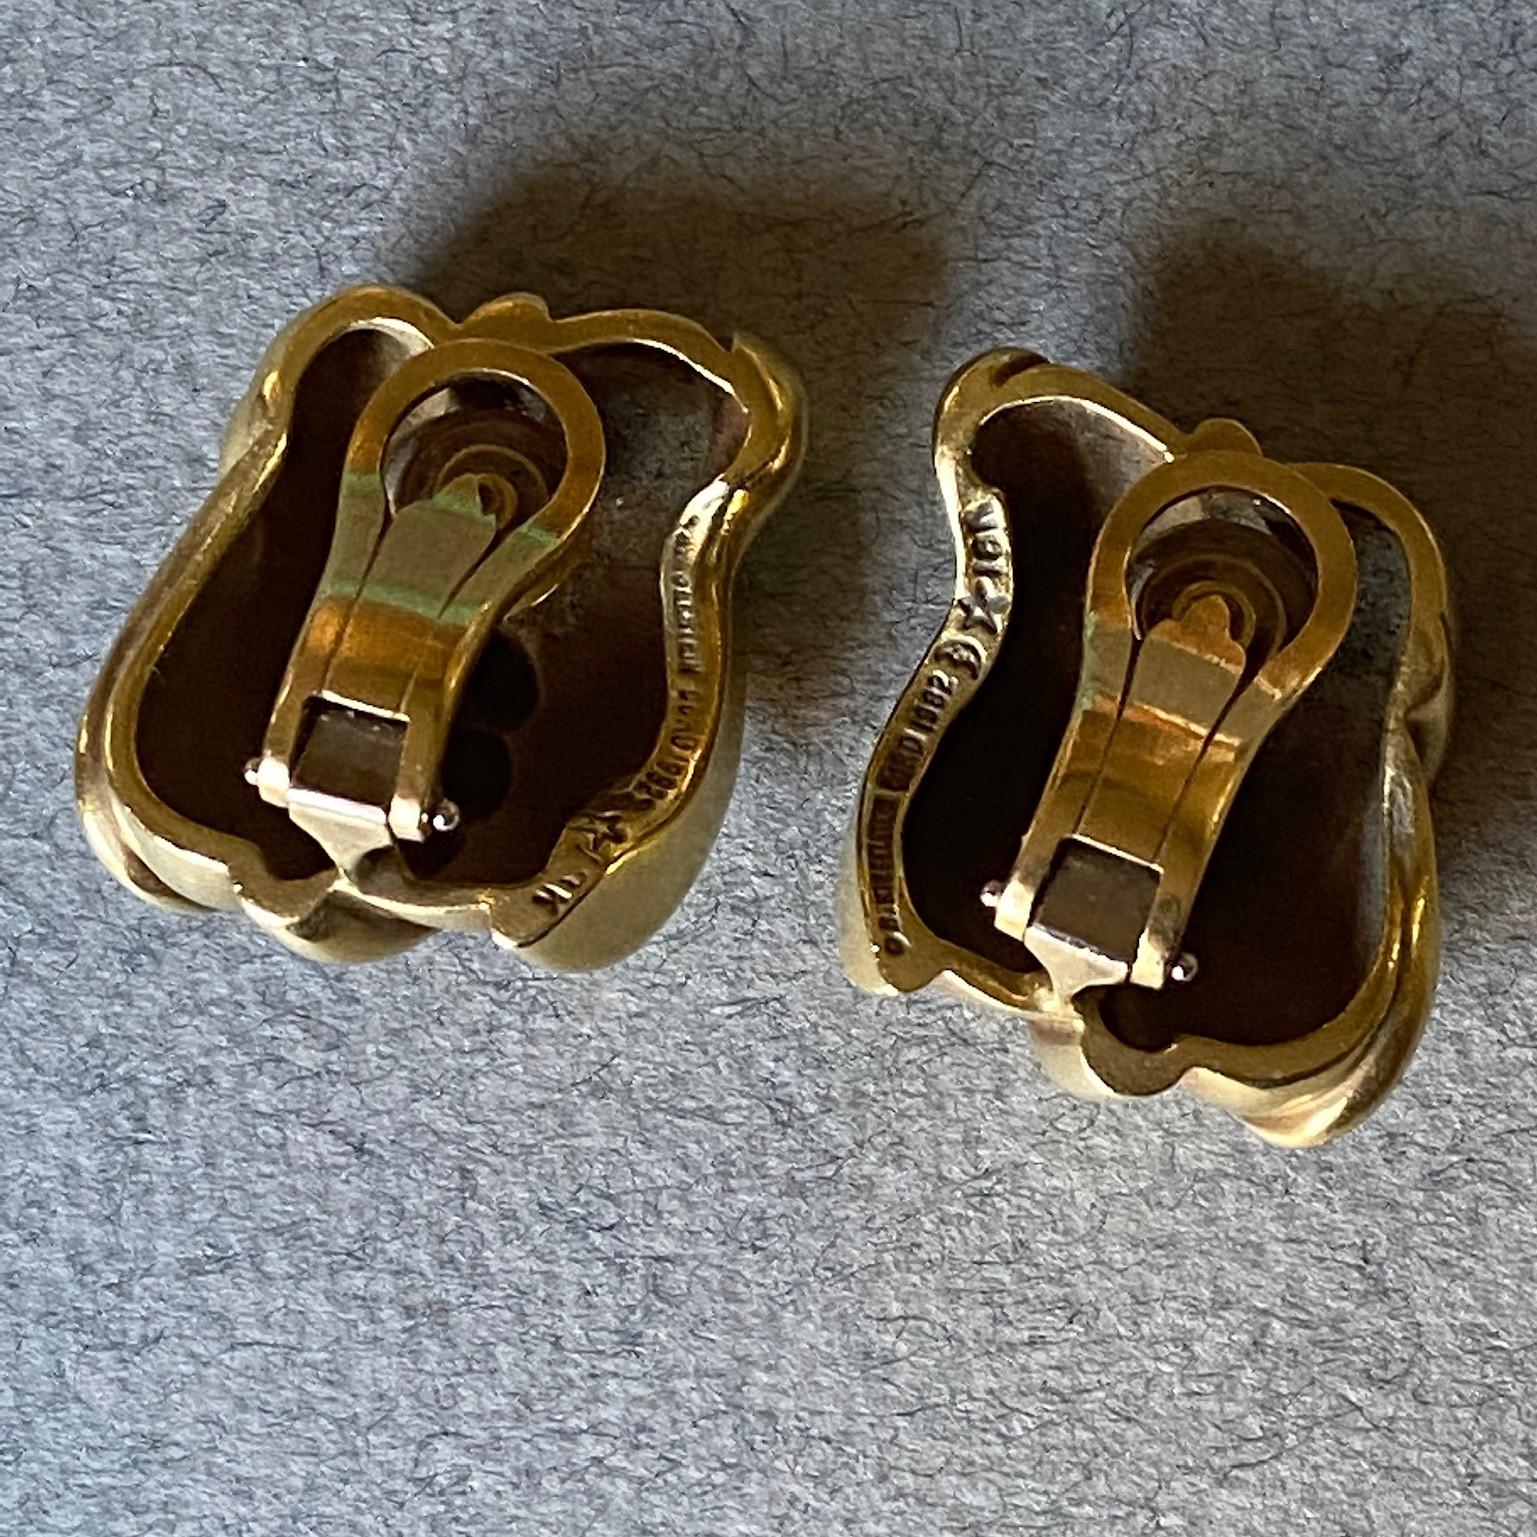 Pair of 18K Gold Clip-On Earrings by Barry Kieselstein In Good Condition For Sale In Big Bend, WI